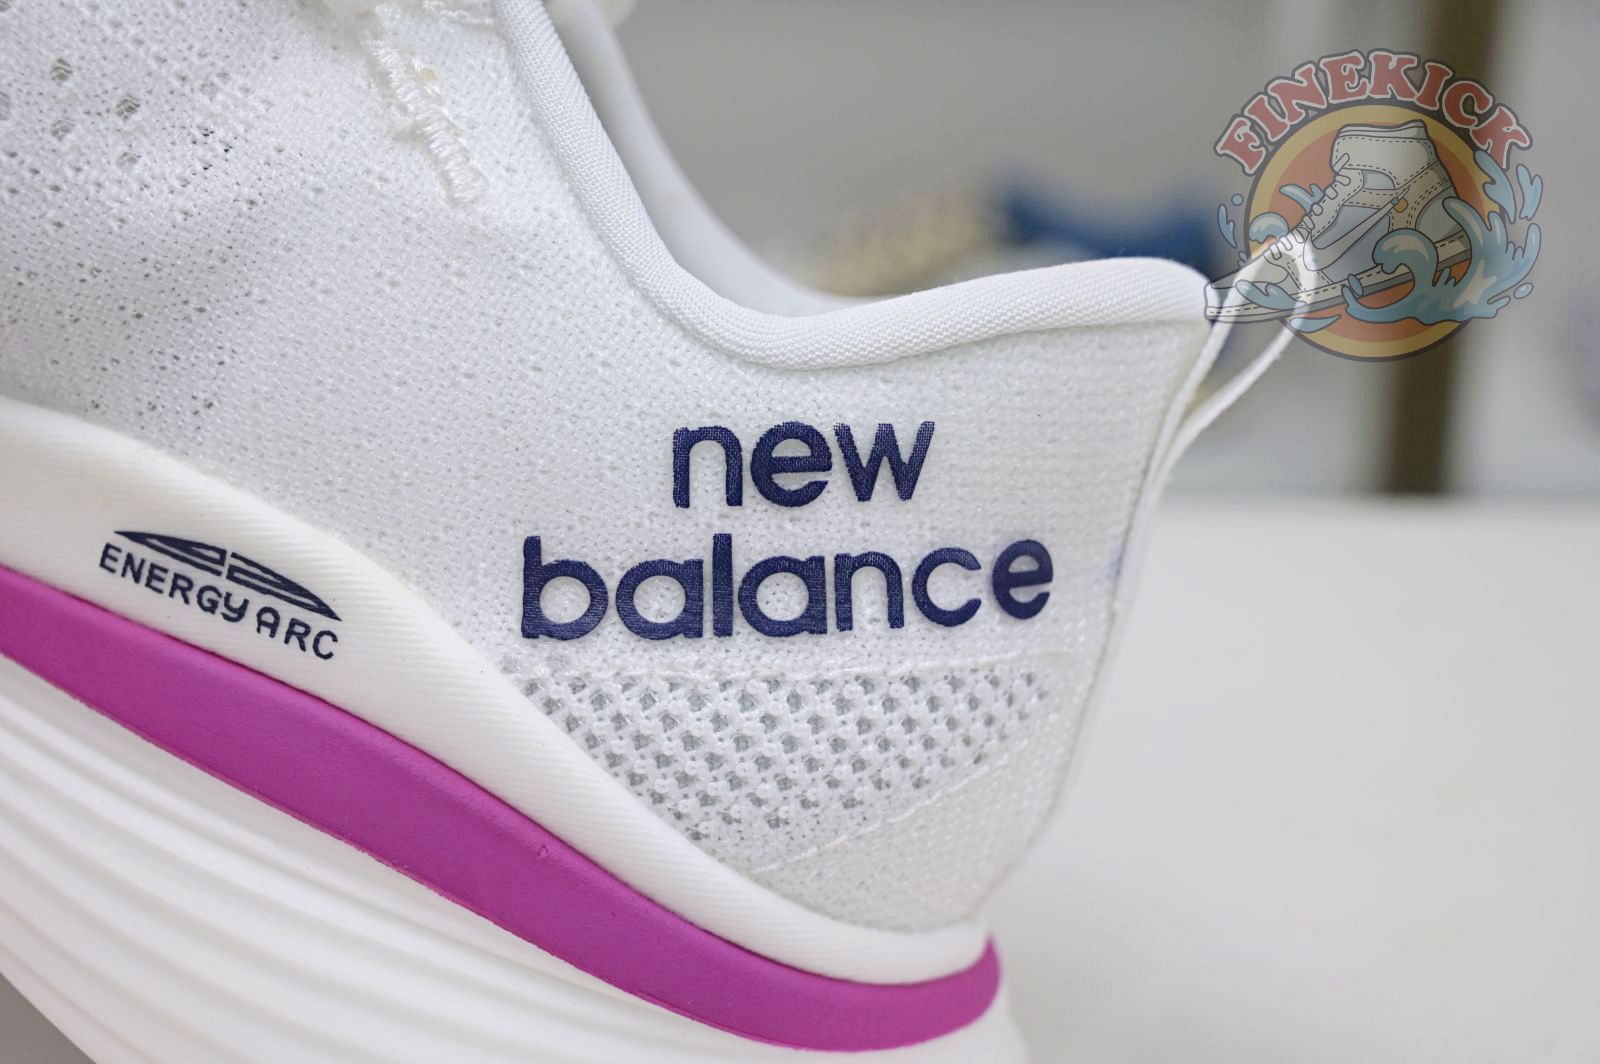 New Balance NB FuelCellFuelCell SC Elite v3